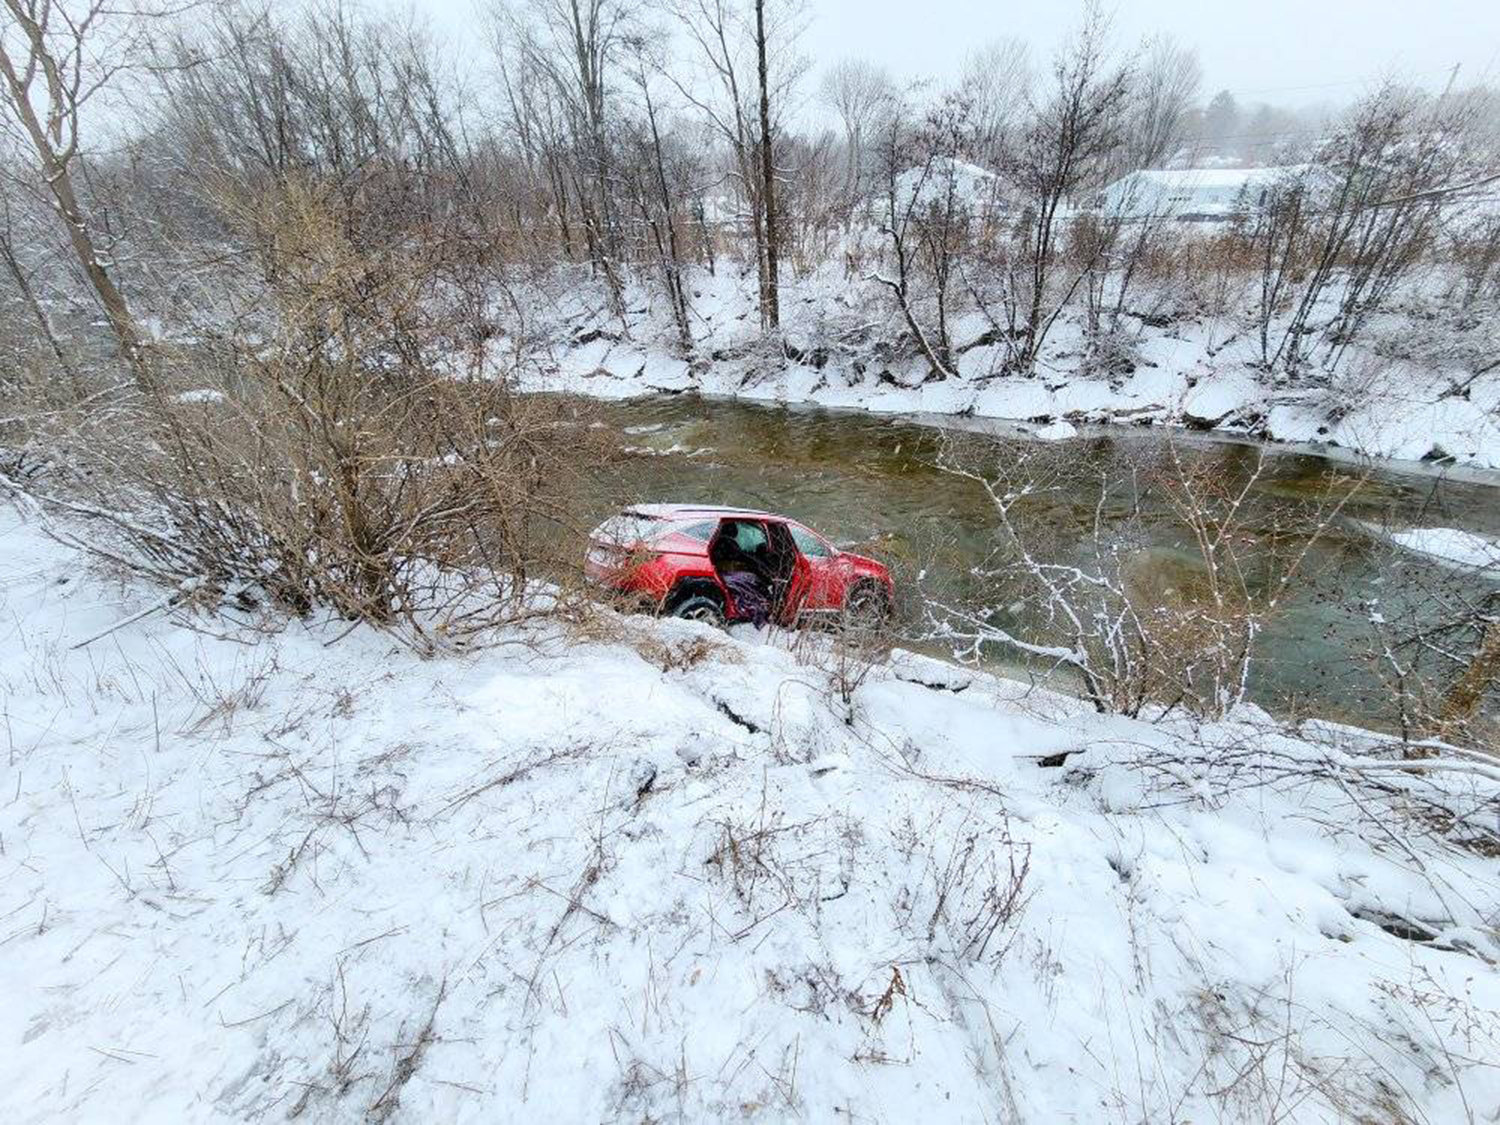 The driver of this SUV was pulled to safety after the vehicle crashed into the Sauquoit Creek off Route 8 Saturday afternoon, according to the Willowvale Fire Department.